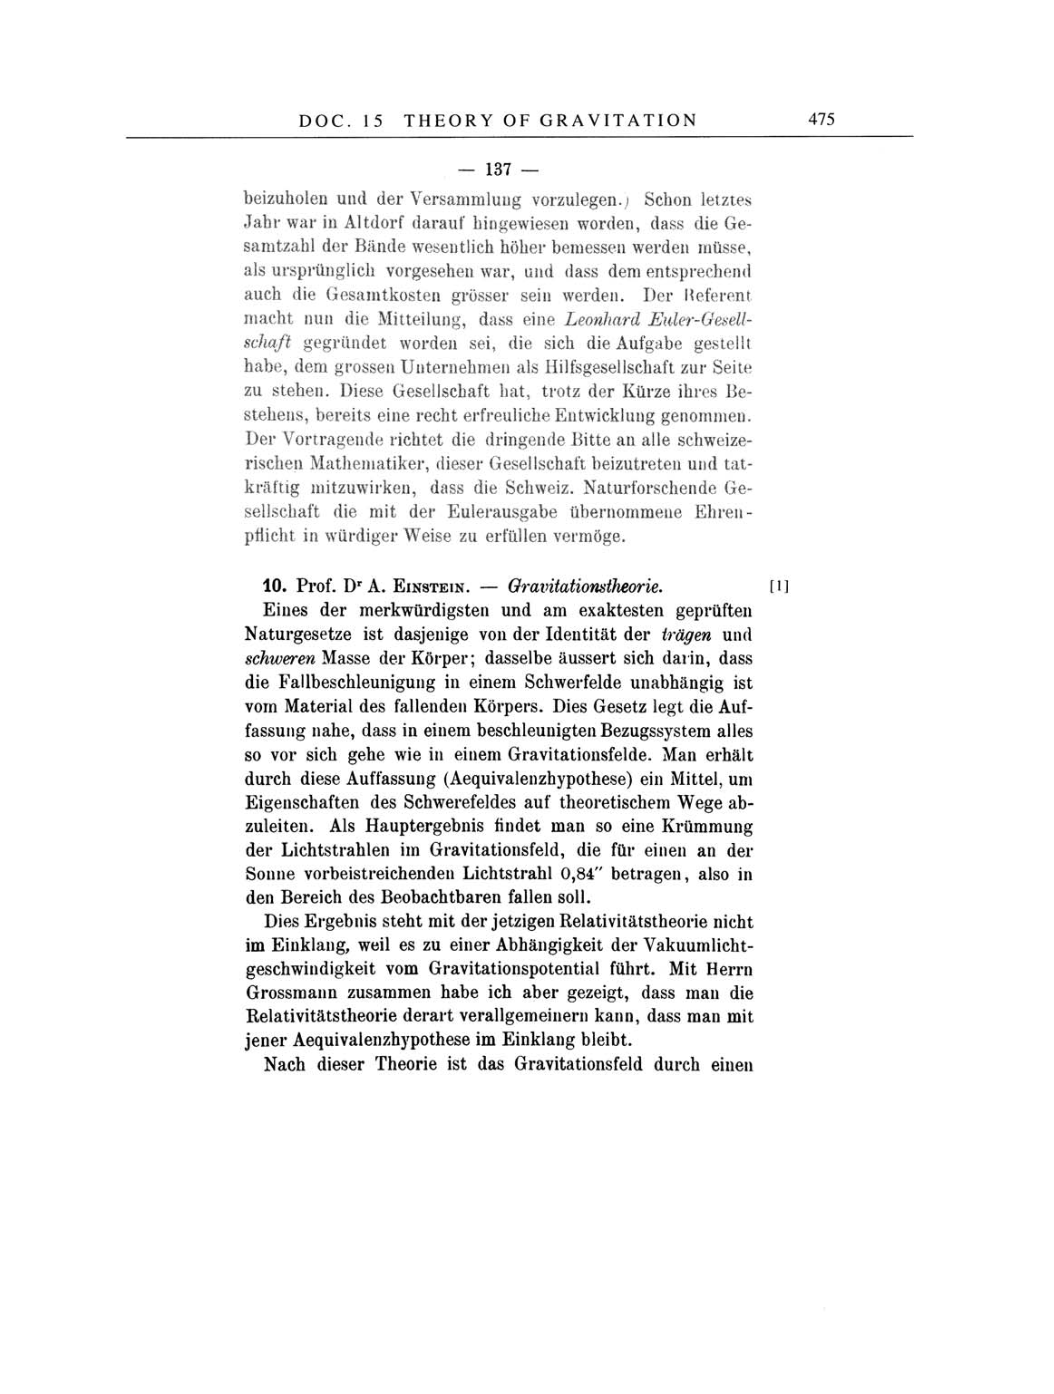 Volume 4: The Swiss Years: Writings 1912-1914 page 475